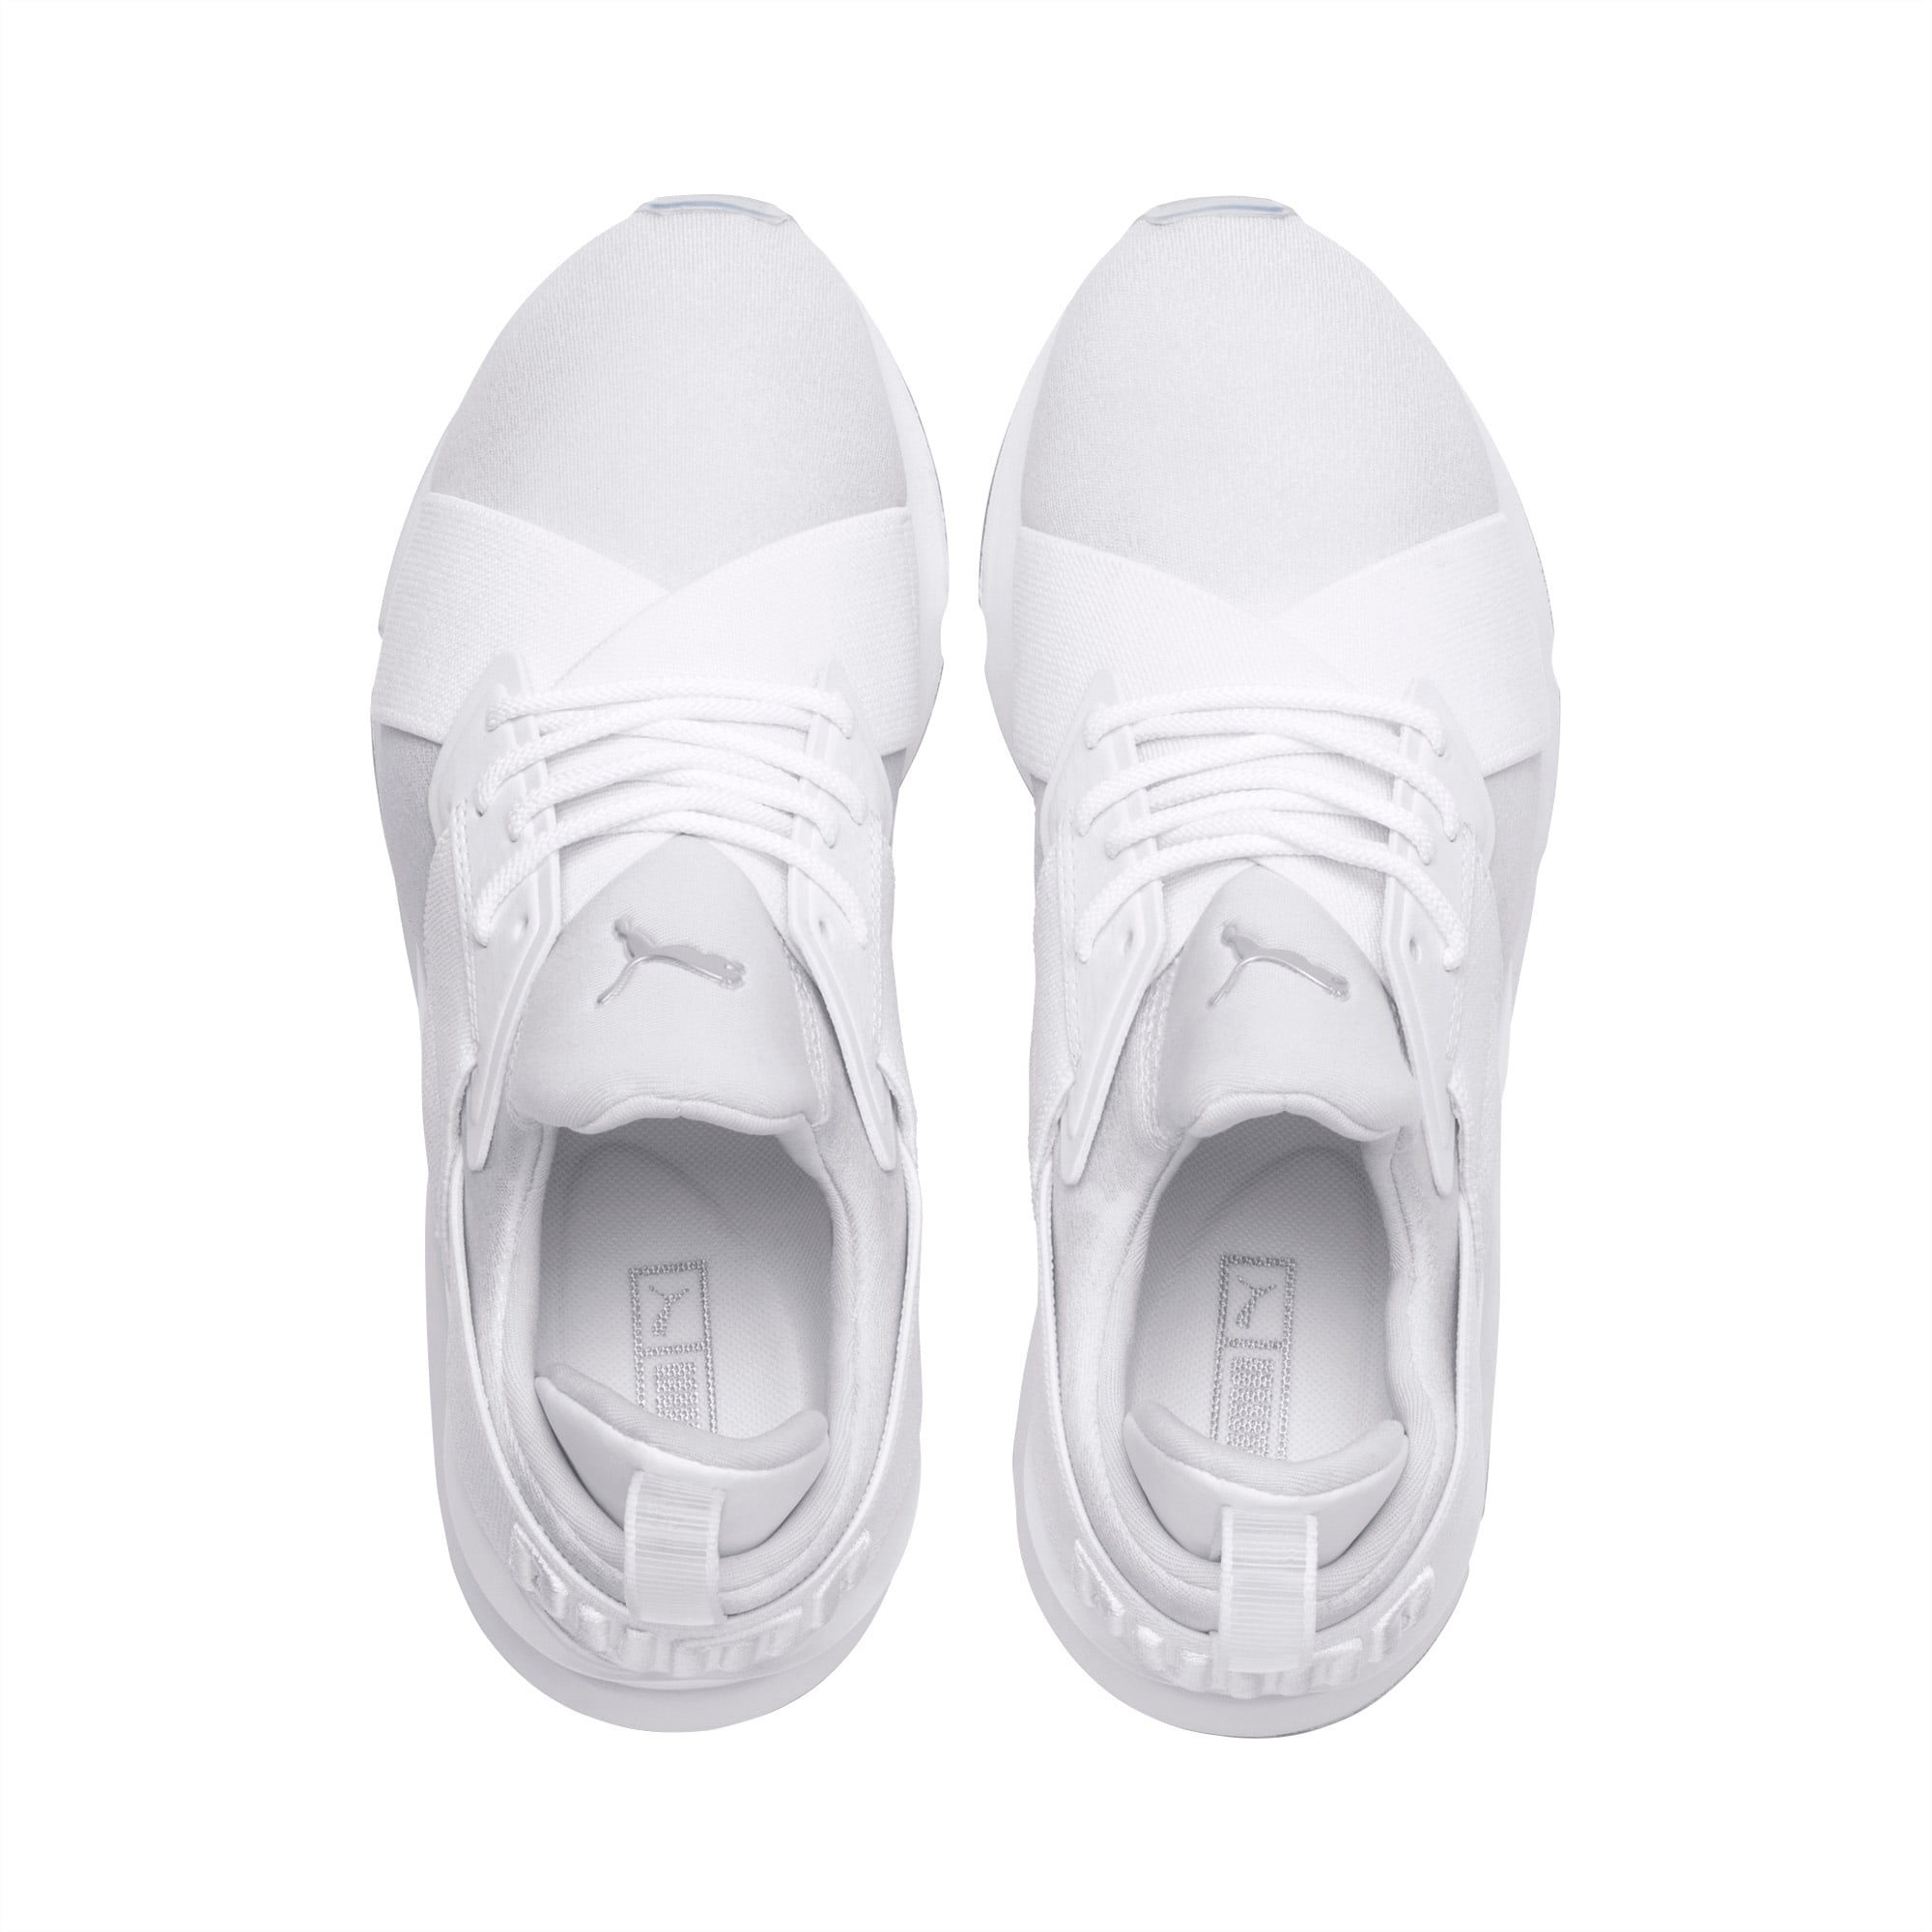 muse ice women's sneakers